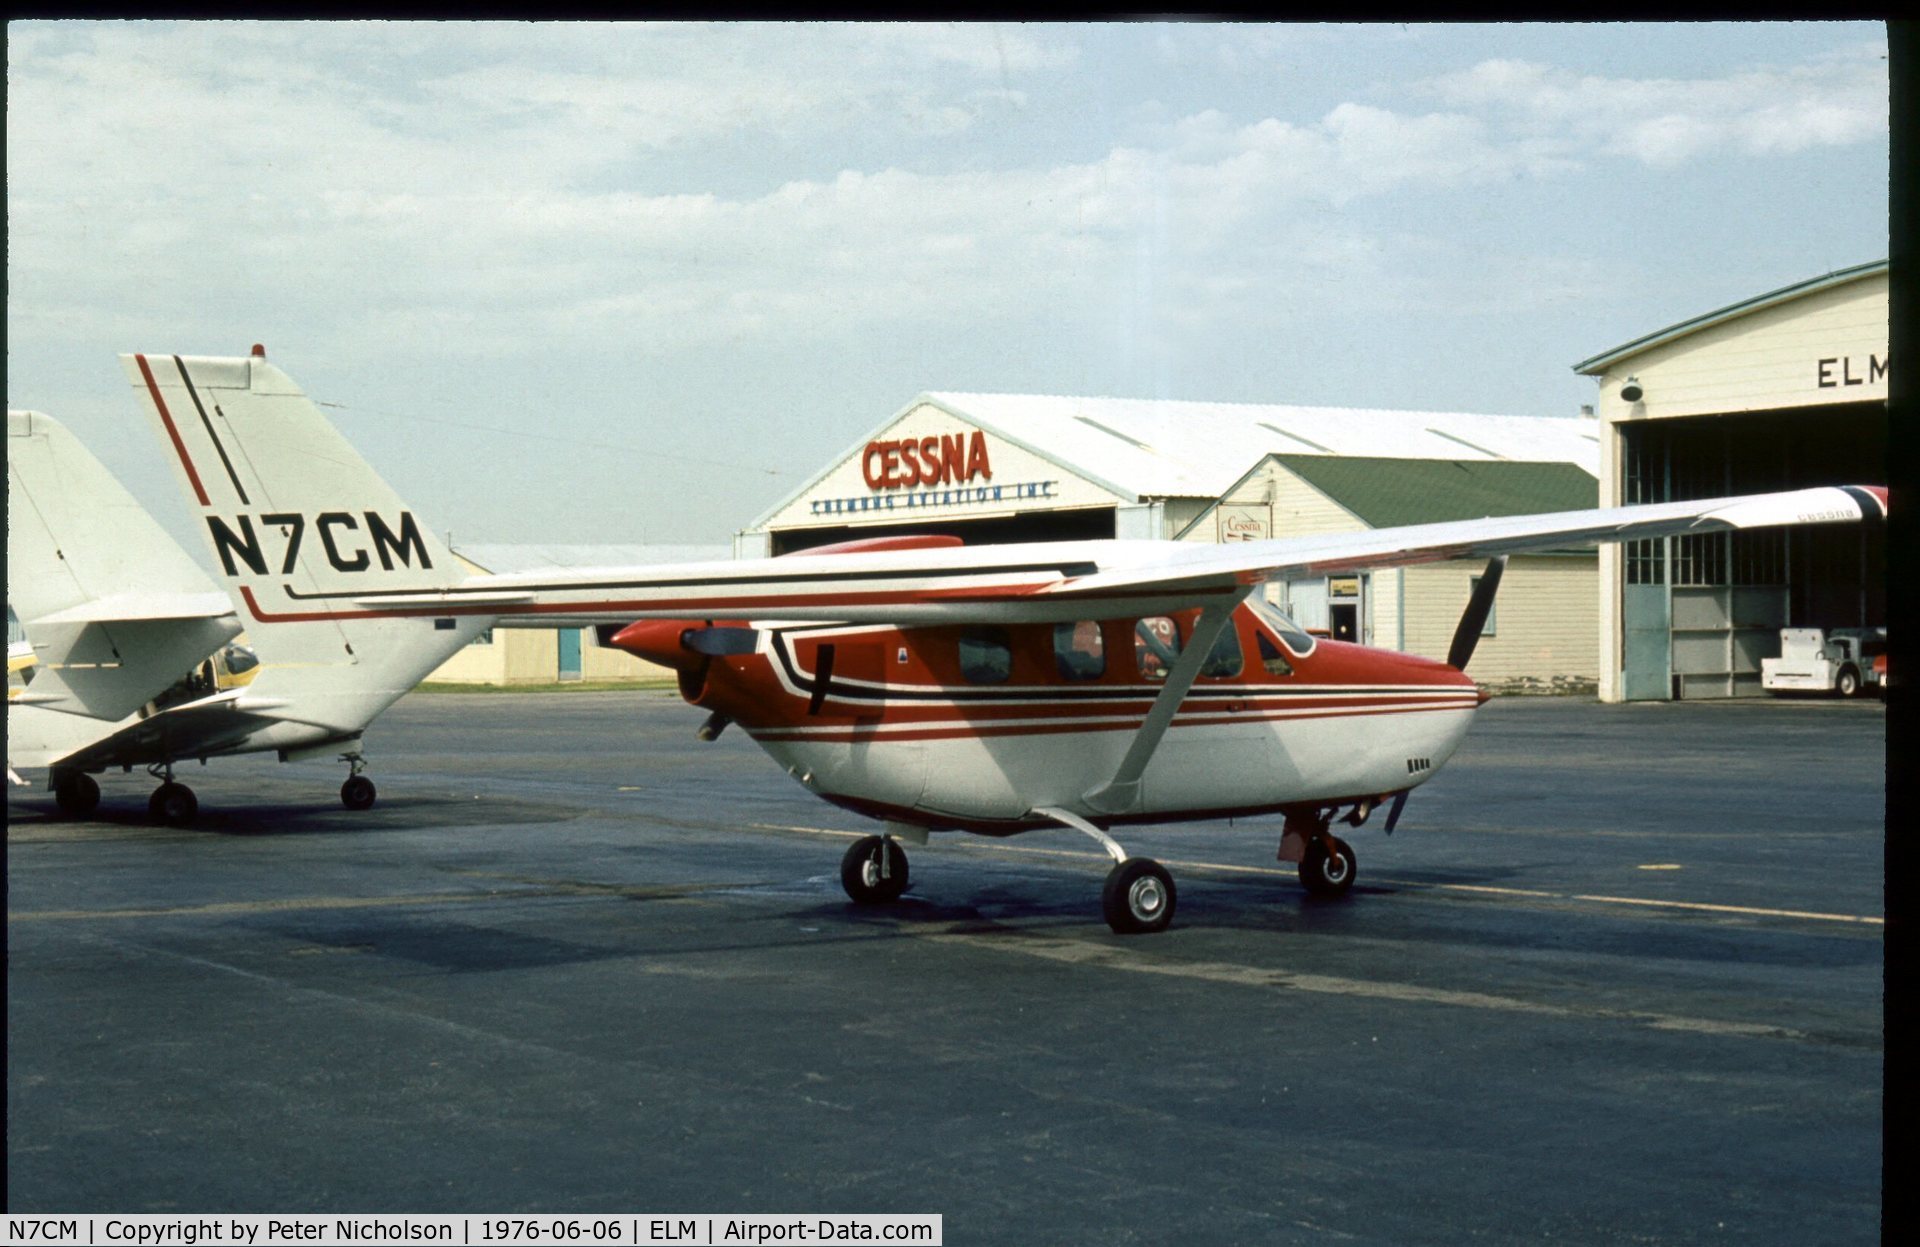 N7CM, 1972 Cessna T337G Turbo Super Skymaster C/N P3370032, This Super Skymaster was seen at Chemung County Airport in the summer of 1976 - airport now known as Elmira Corning Regional Airport.